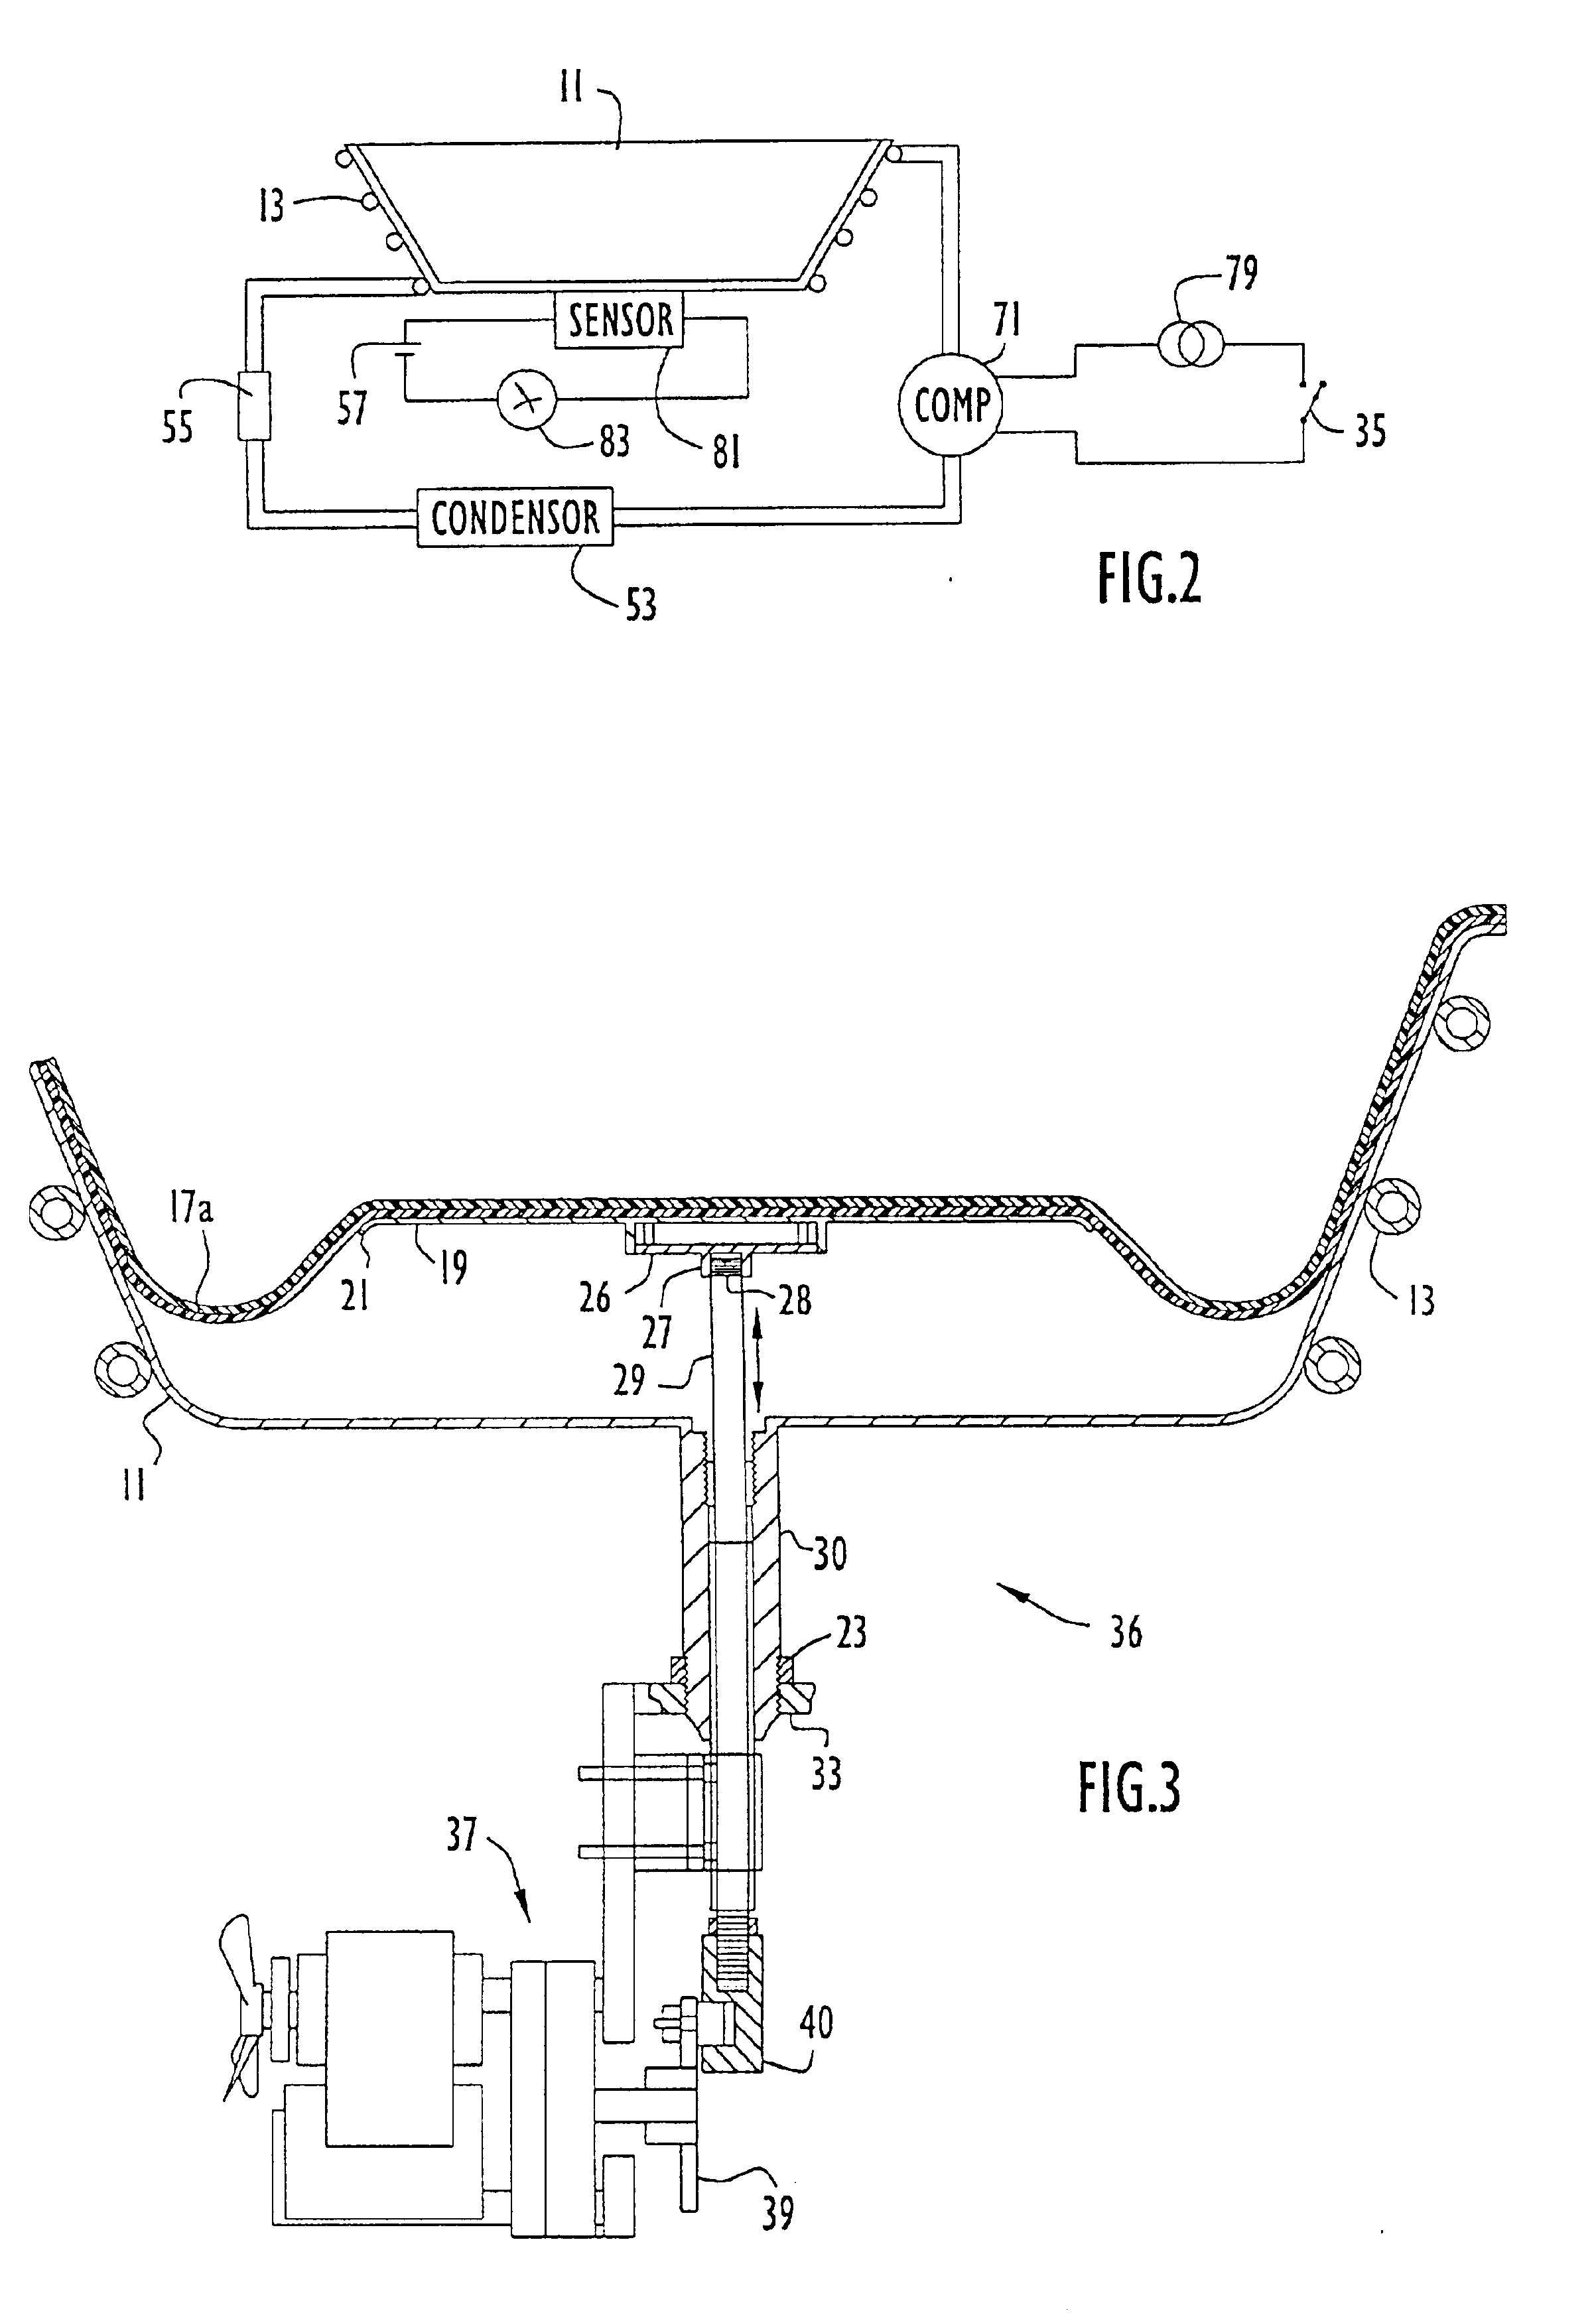 Thermal treatment system and method for controlling the system remotely to thermally treat sterile surgical liquid